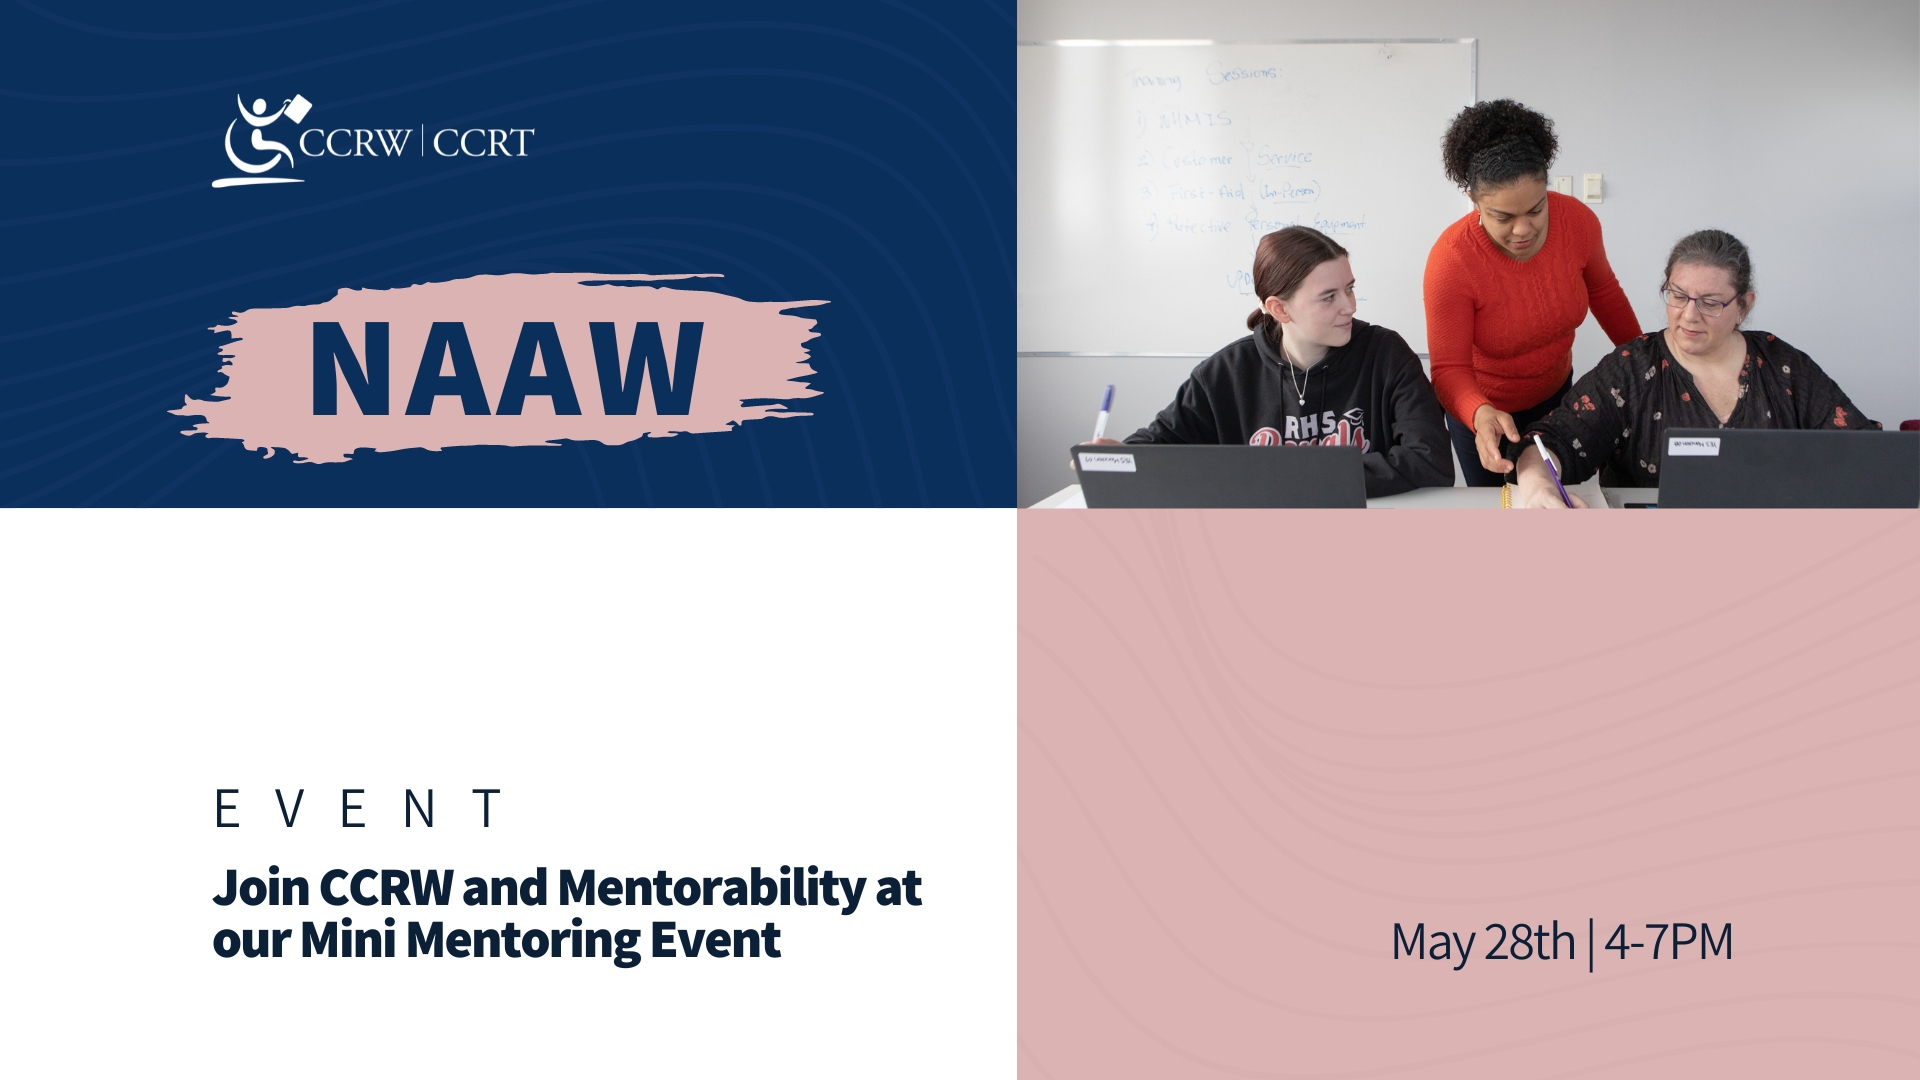 Join CCRW and Mentorability at our Mini Mentoring Event